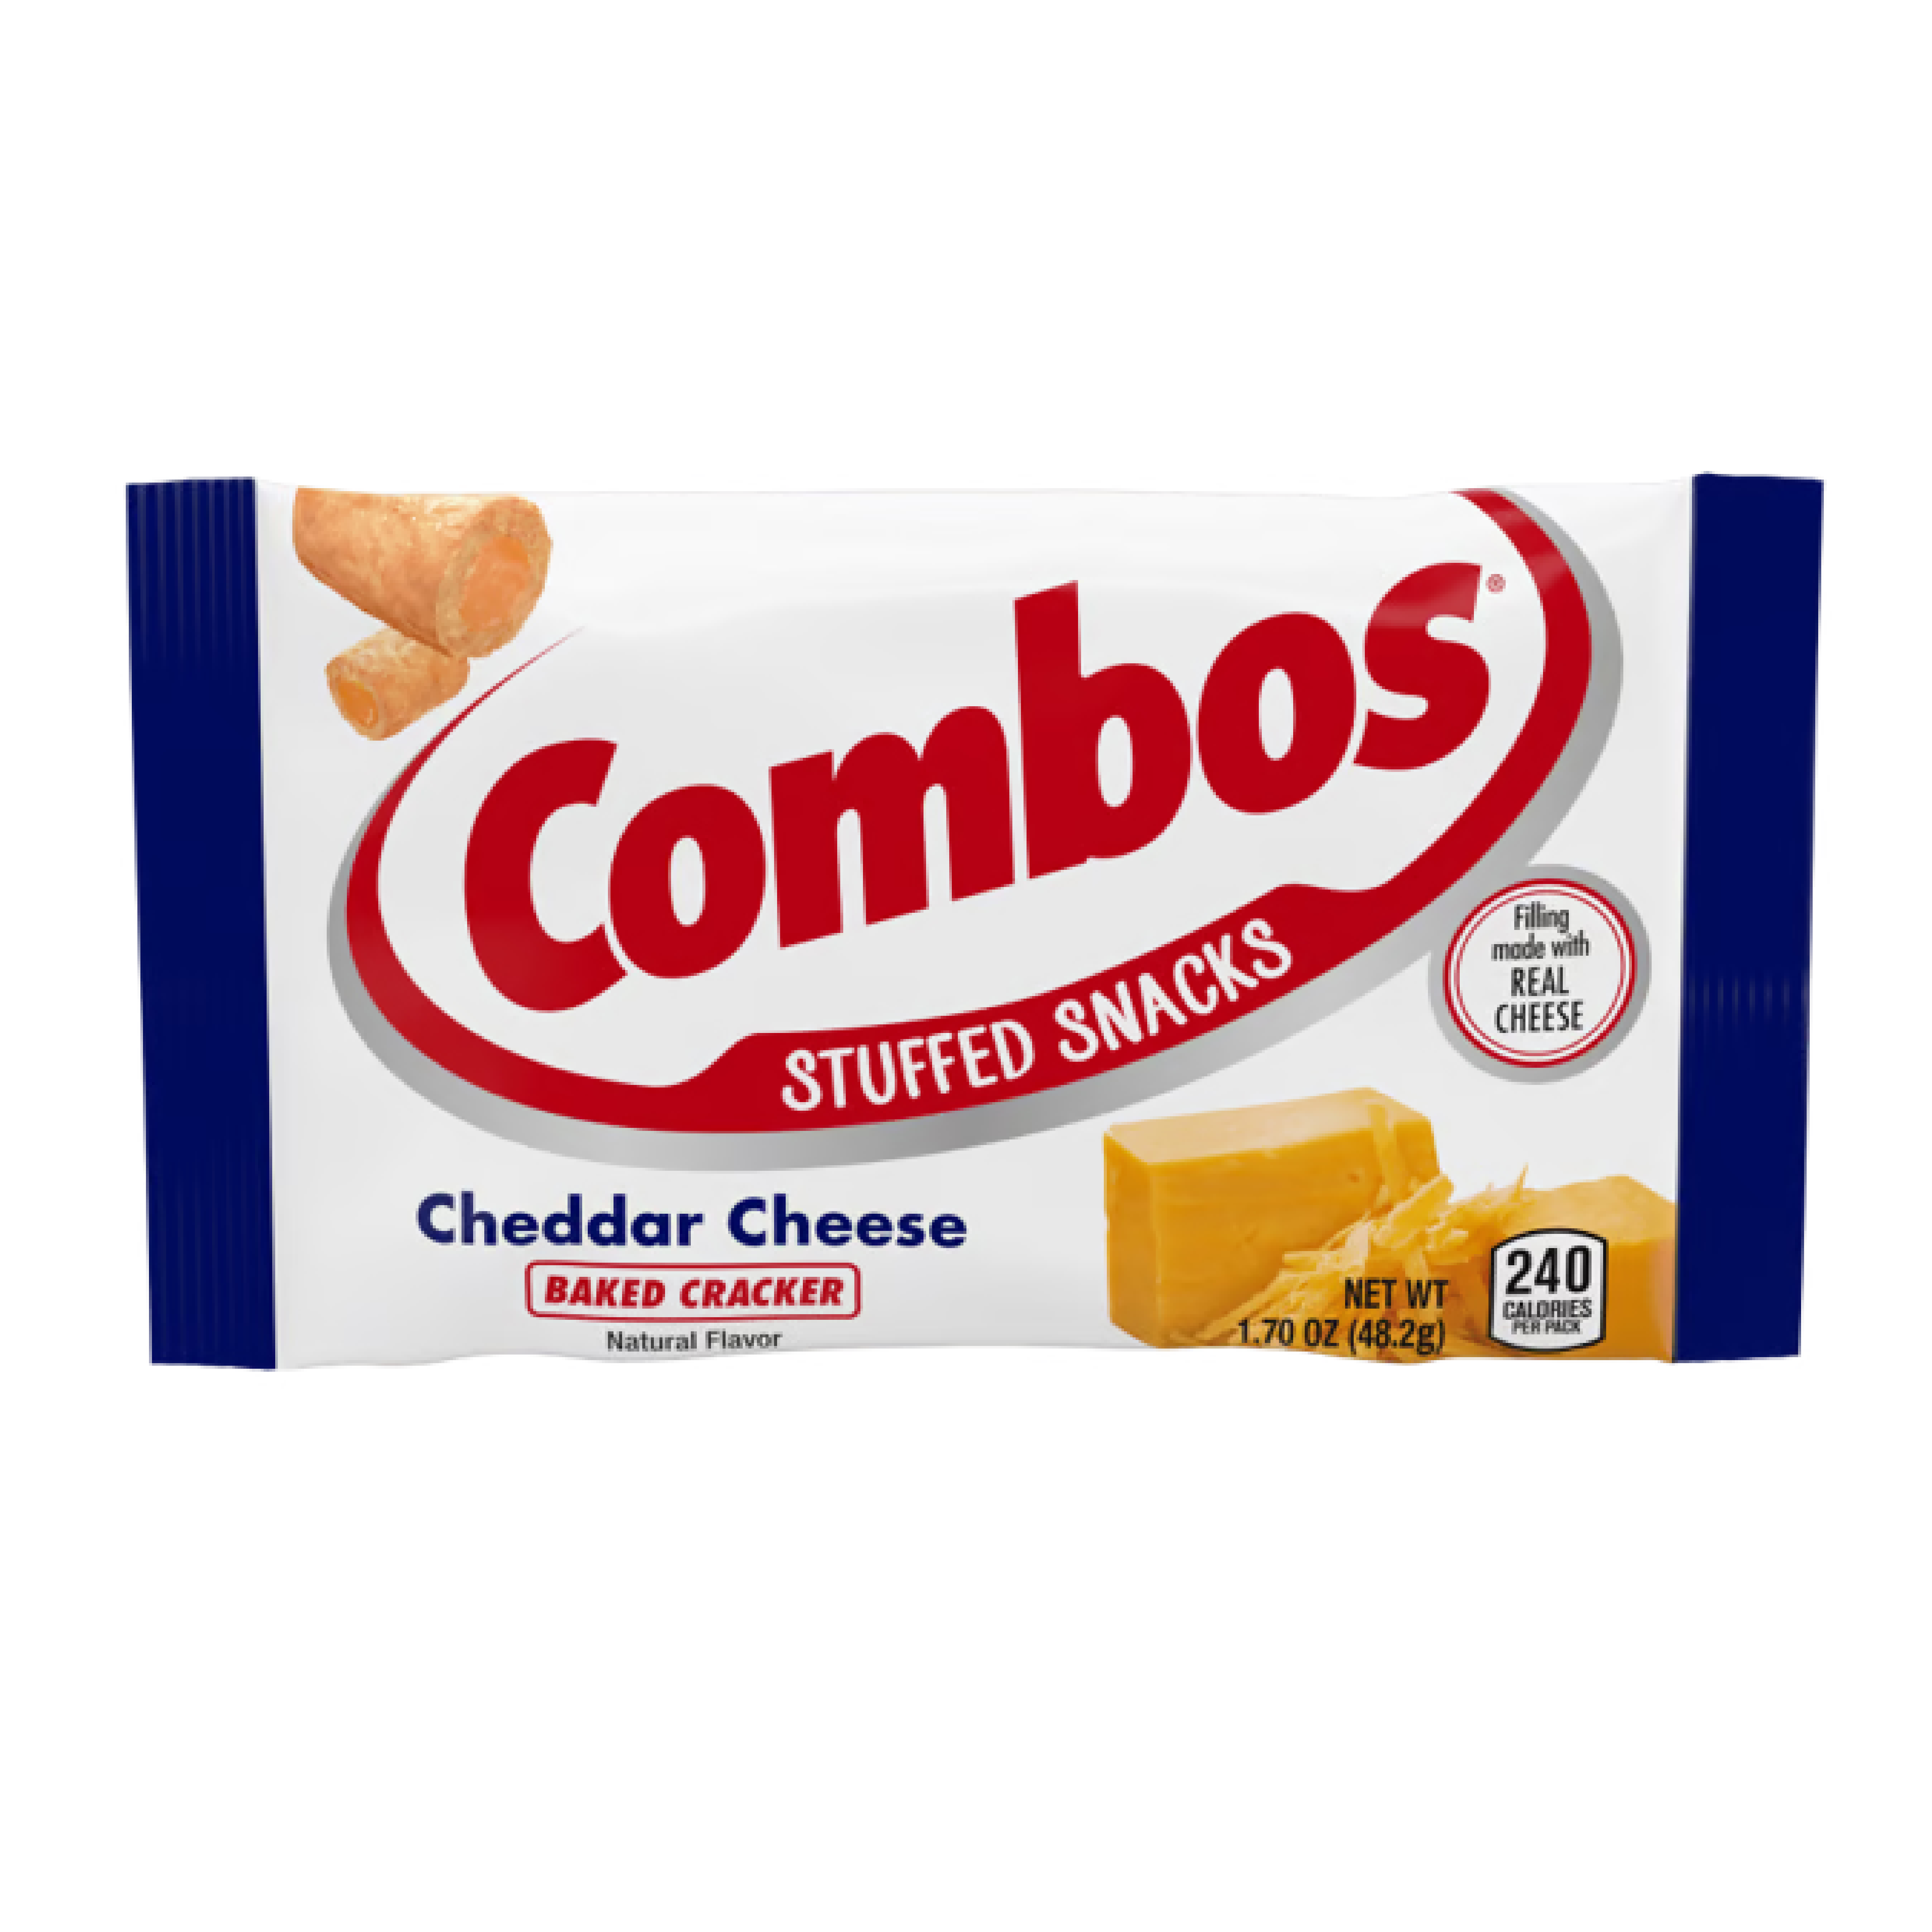 Combos Cheddar Cheese Baked Cracker Stuffed Snack 1.8oz